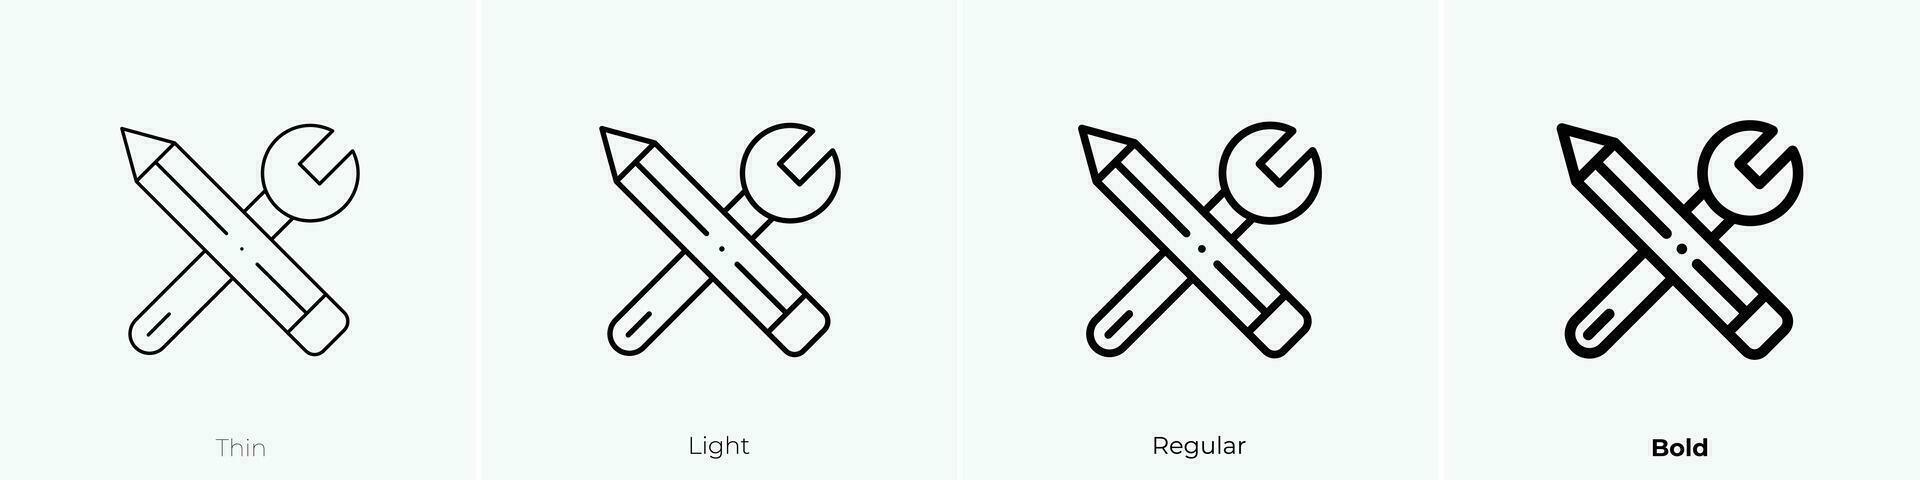 tools icon. Thin, Light, Regular And Bold style design isolated on white background vector